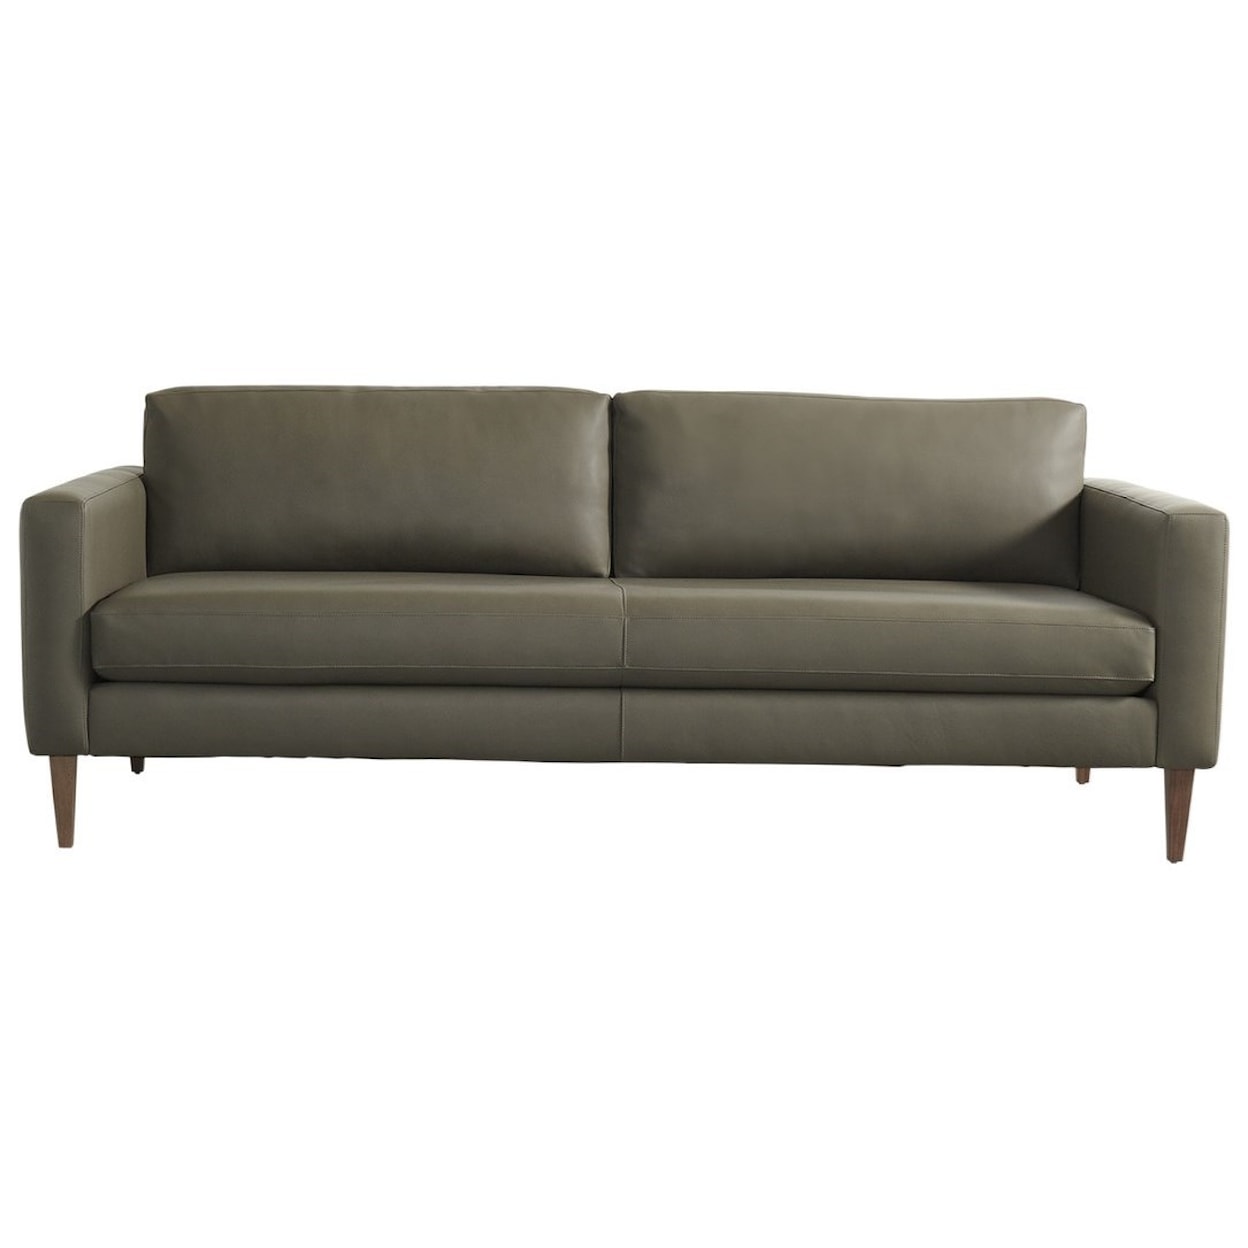 American Leather Grand Track Arm - Personalize Grand Track Arm Sofa